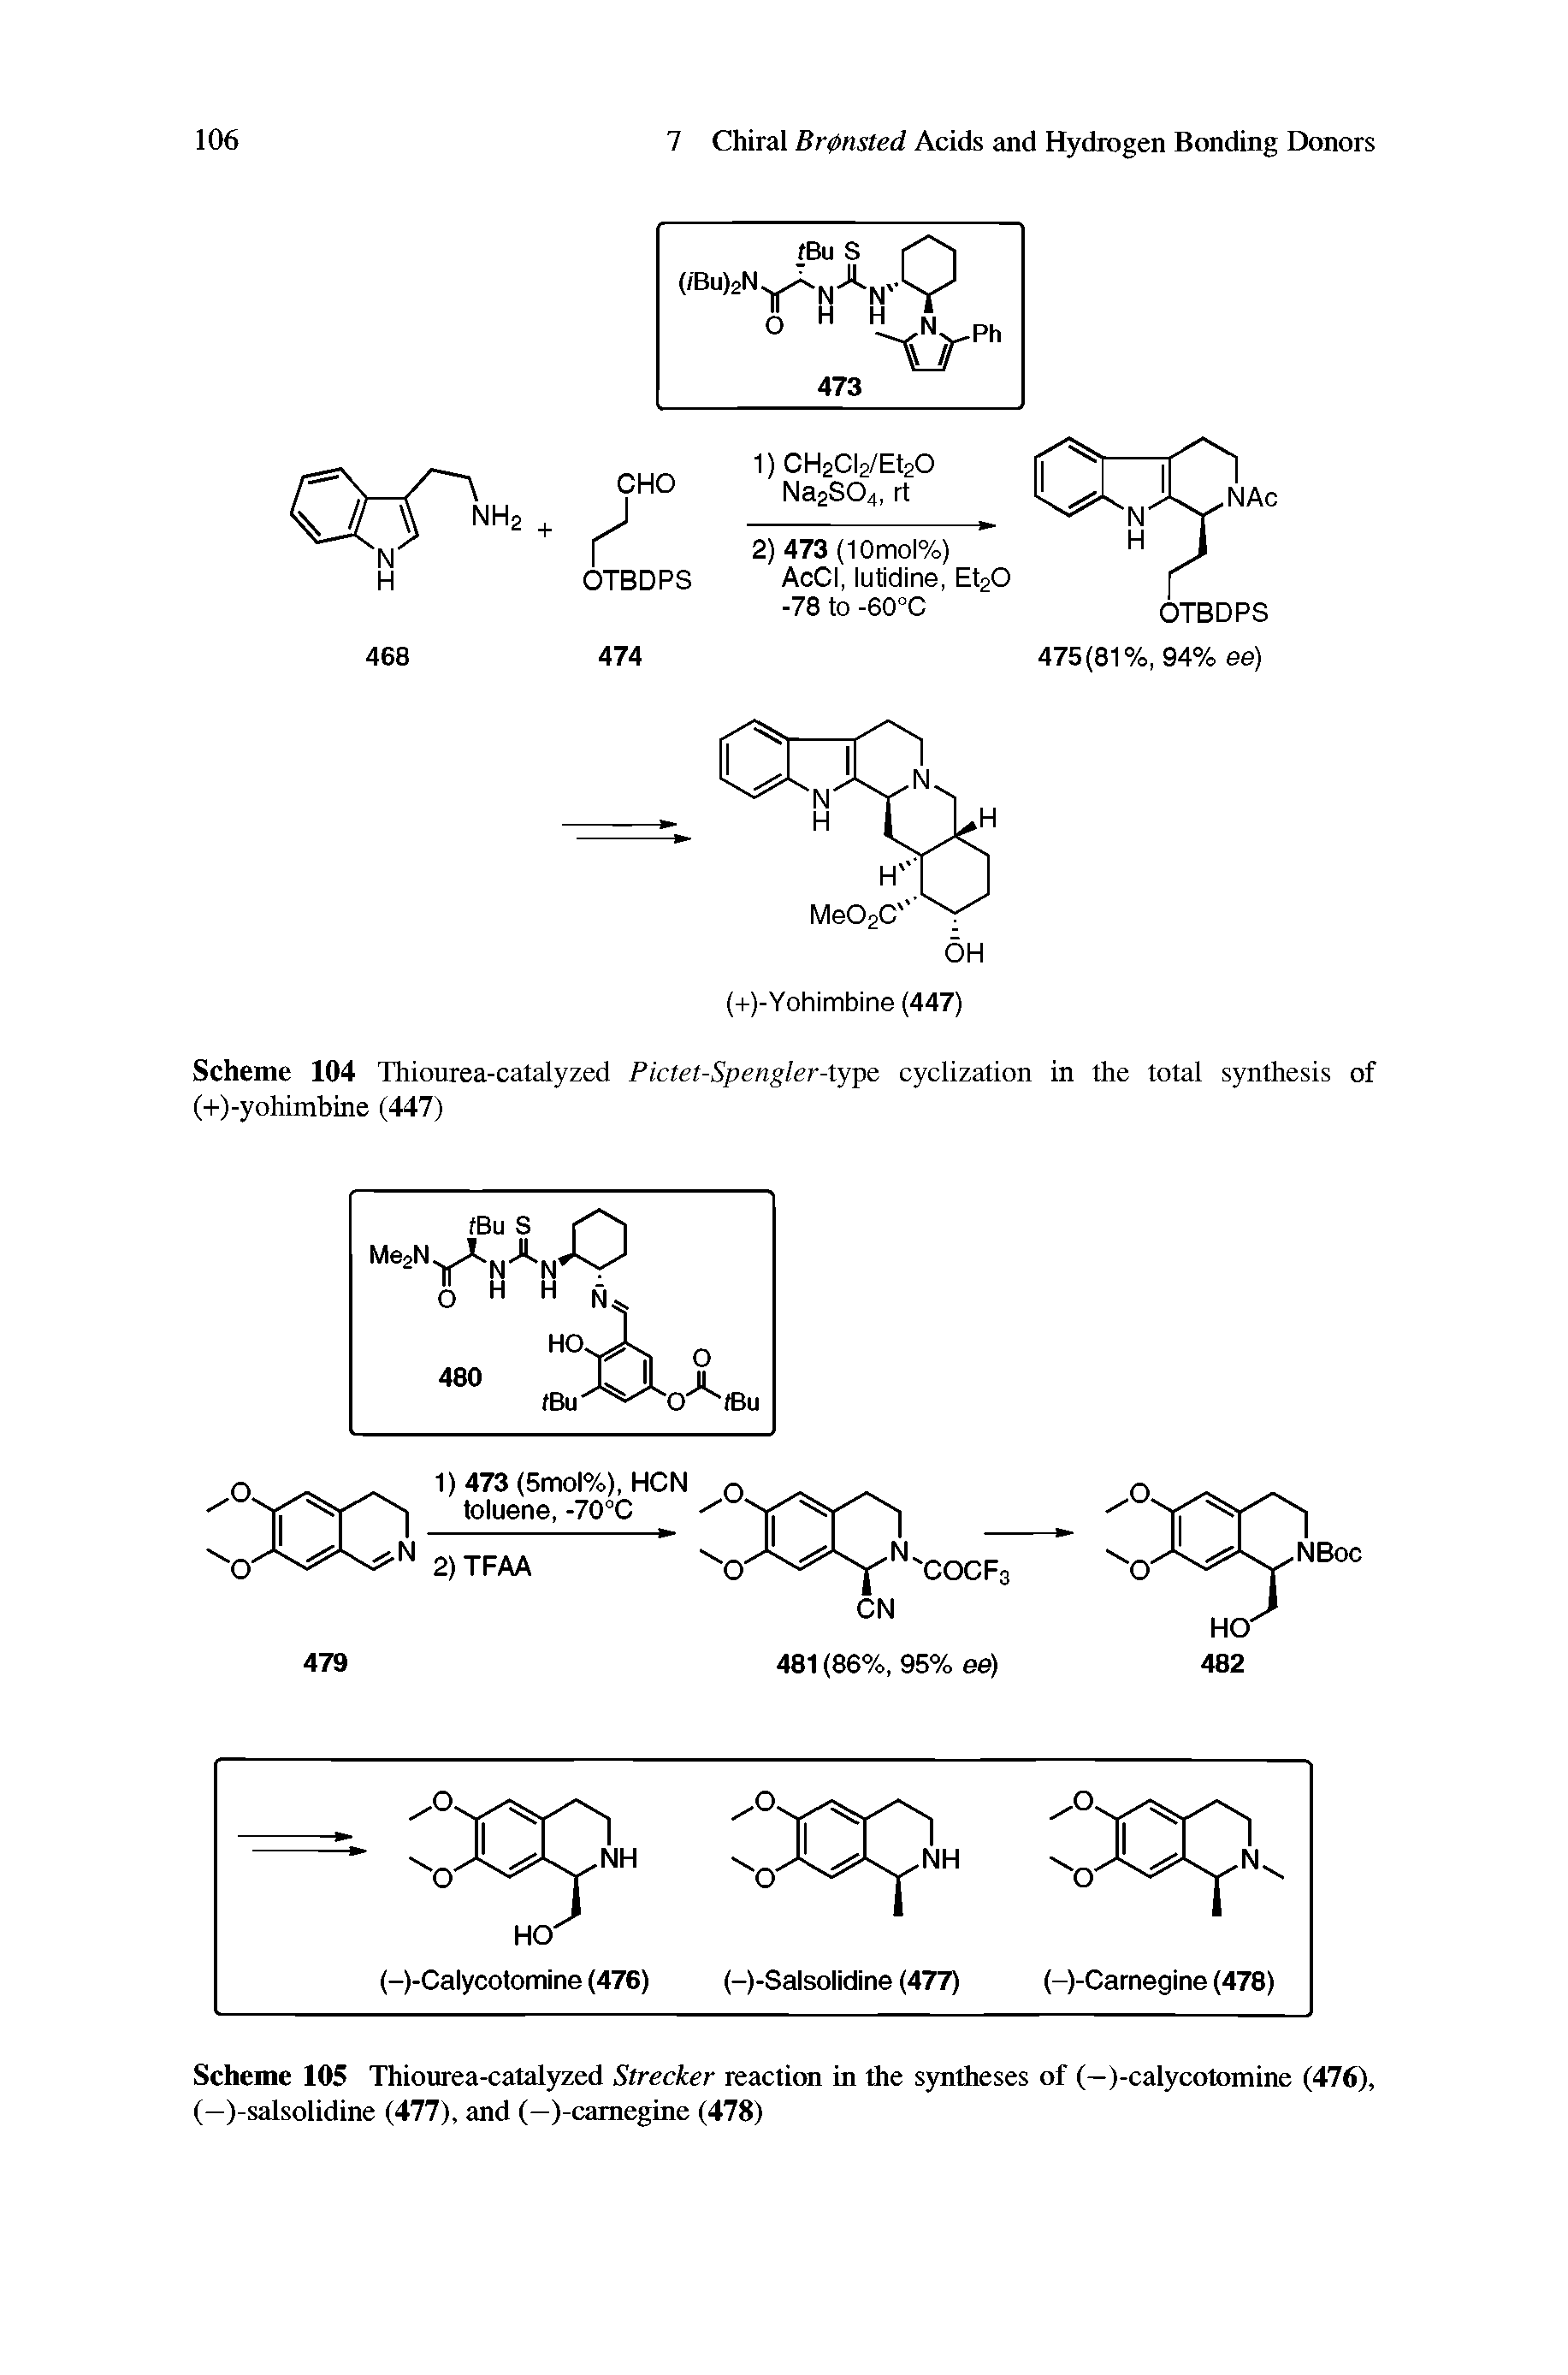 Scheme 105 Thiourea-catalyzed Strecker reaction in the s oitheses of (—)-calycotomine (476), (—)-salsolidine (477), and (—)-camegine (478)...